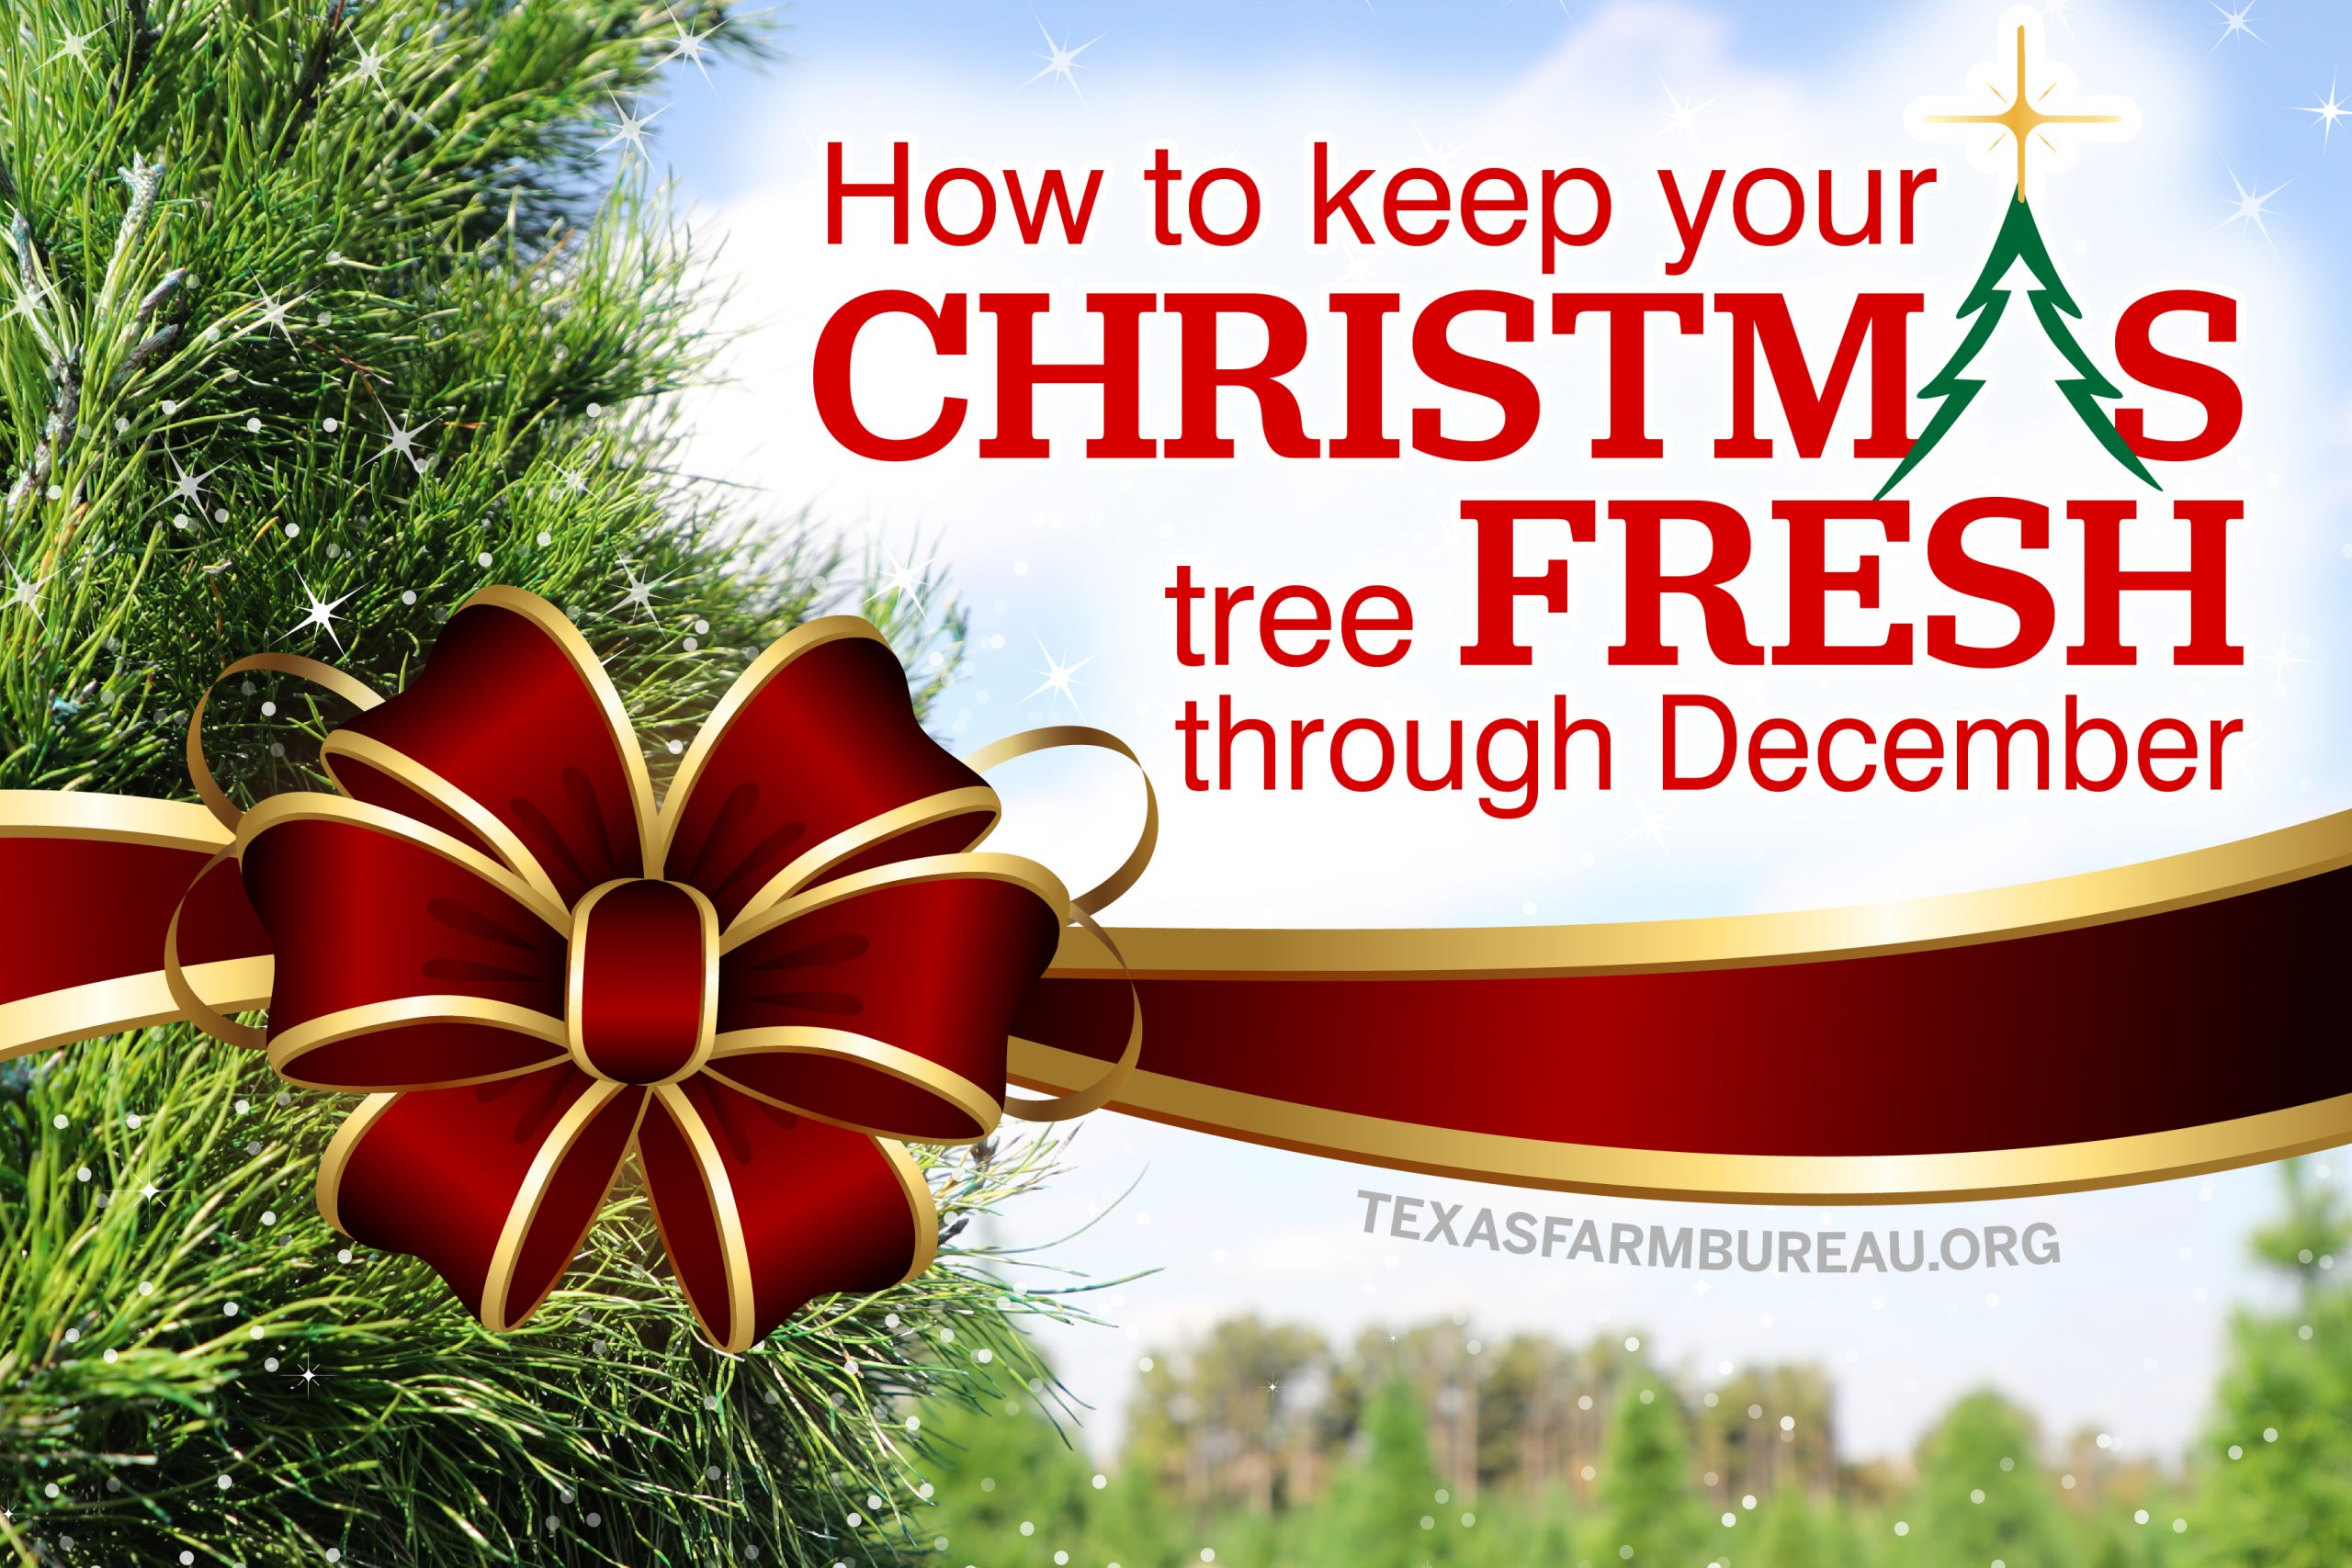 there are a few things you should keep in mind with your real Christmas tree to help keep it fresh through the holiday season.